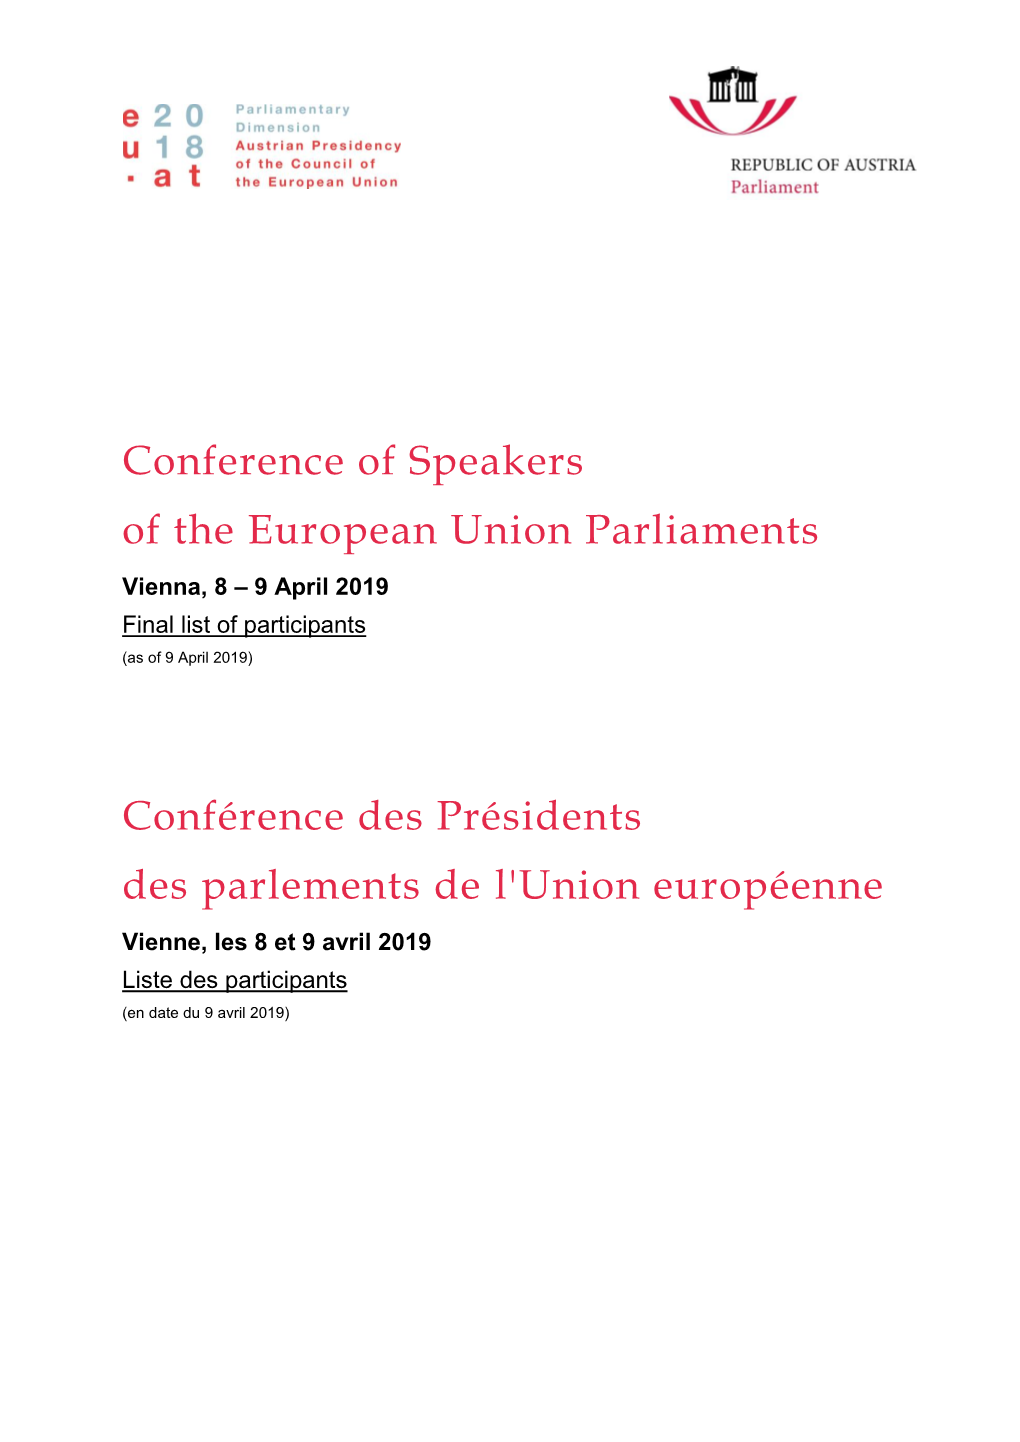 Conference of Speakers of the European Union Parliaments Vienna, 8 – 9 April 2019 Final List of Participants (As of 9 April 2019)